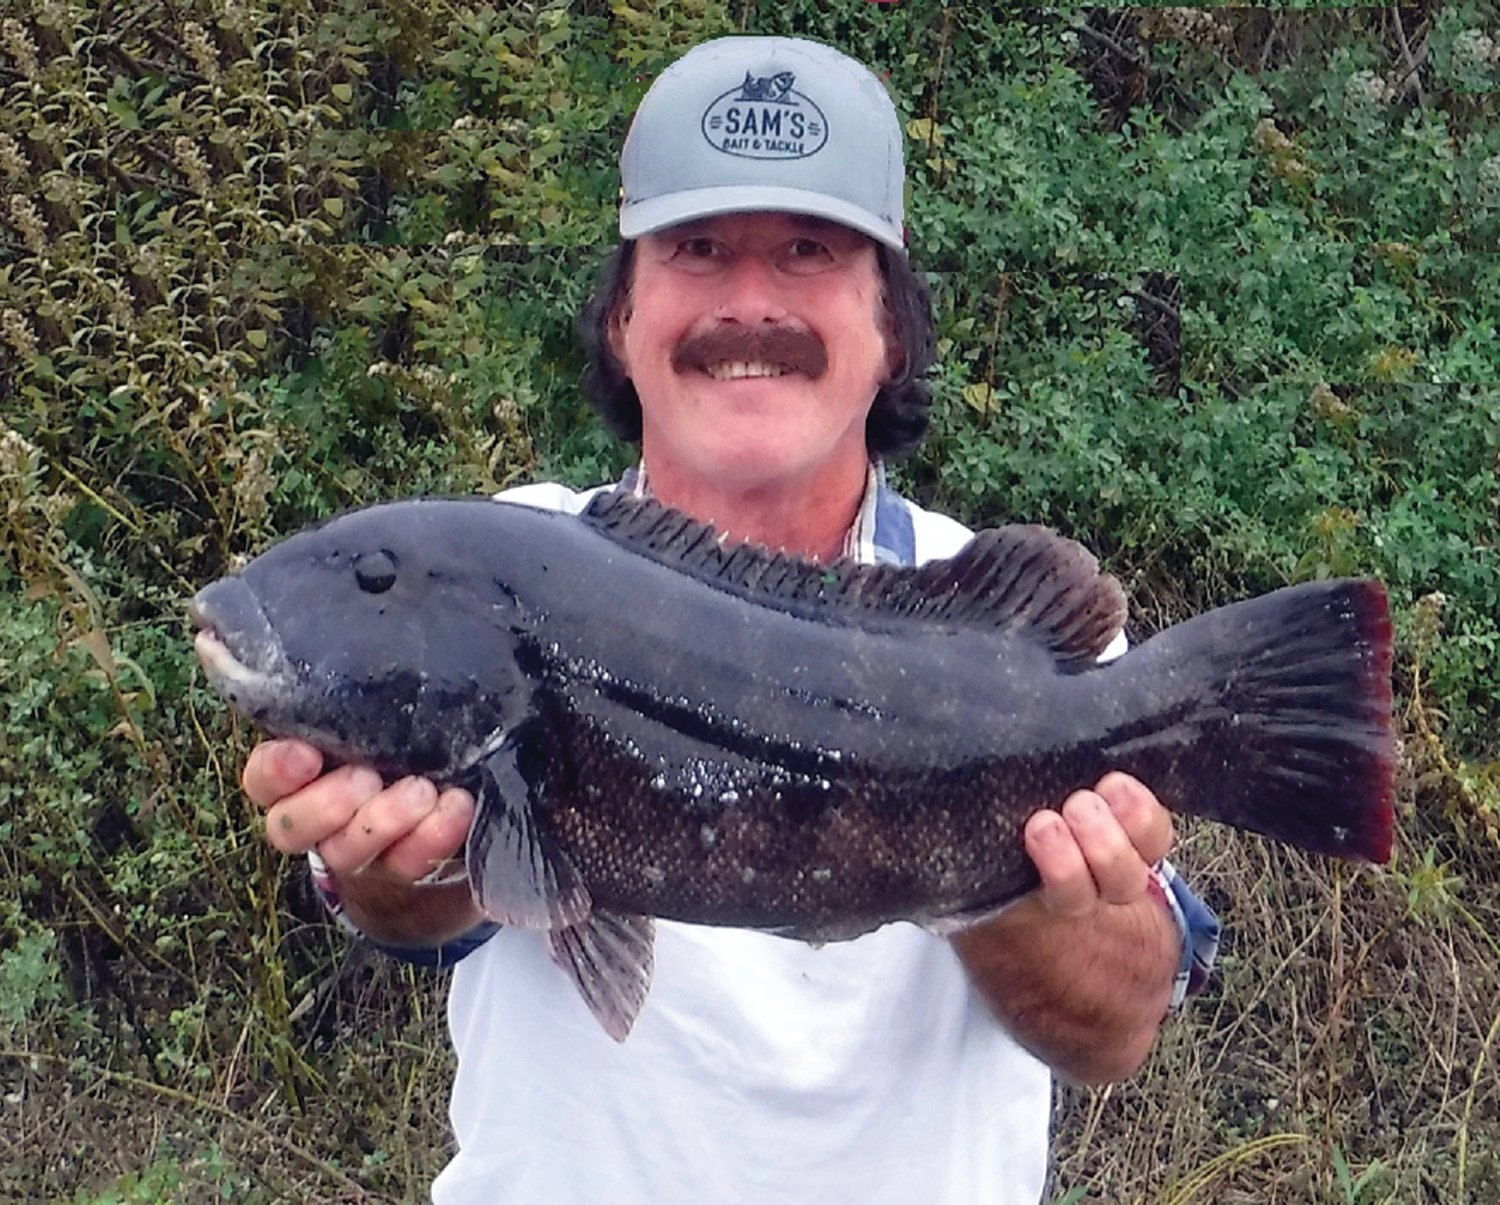 STRONG TAUTOG BITE:   Angler John Migliori with the seven pound, fourteen once tautog he caught fishing off Aquidneck Island last weekend. (Submitted photo)